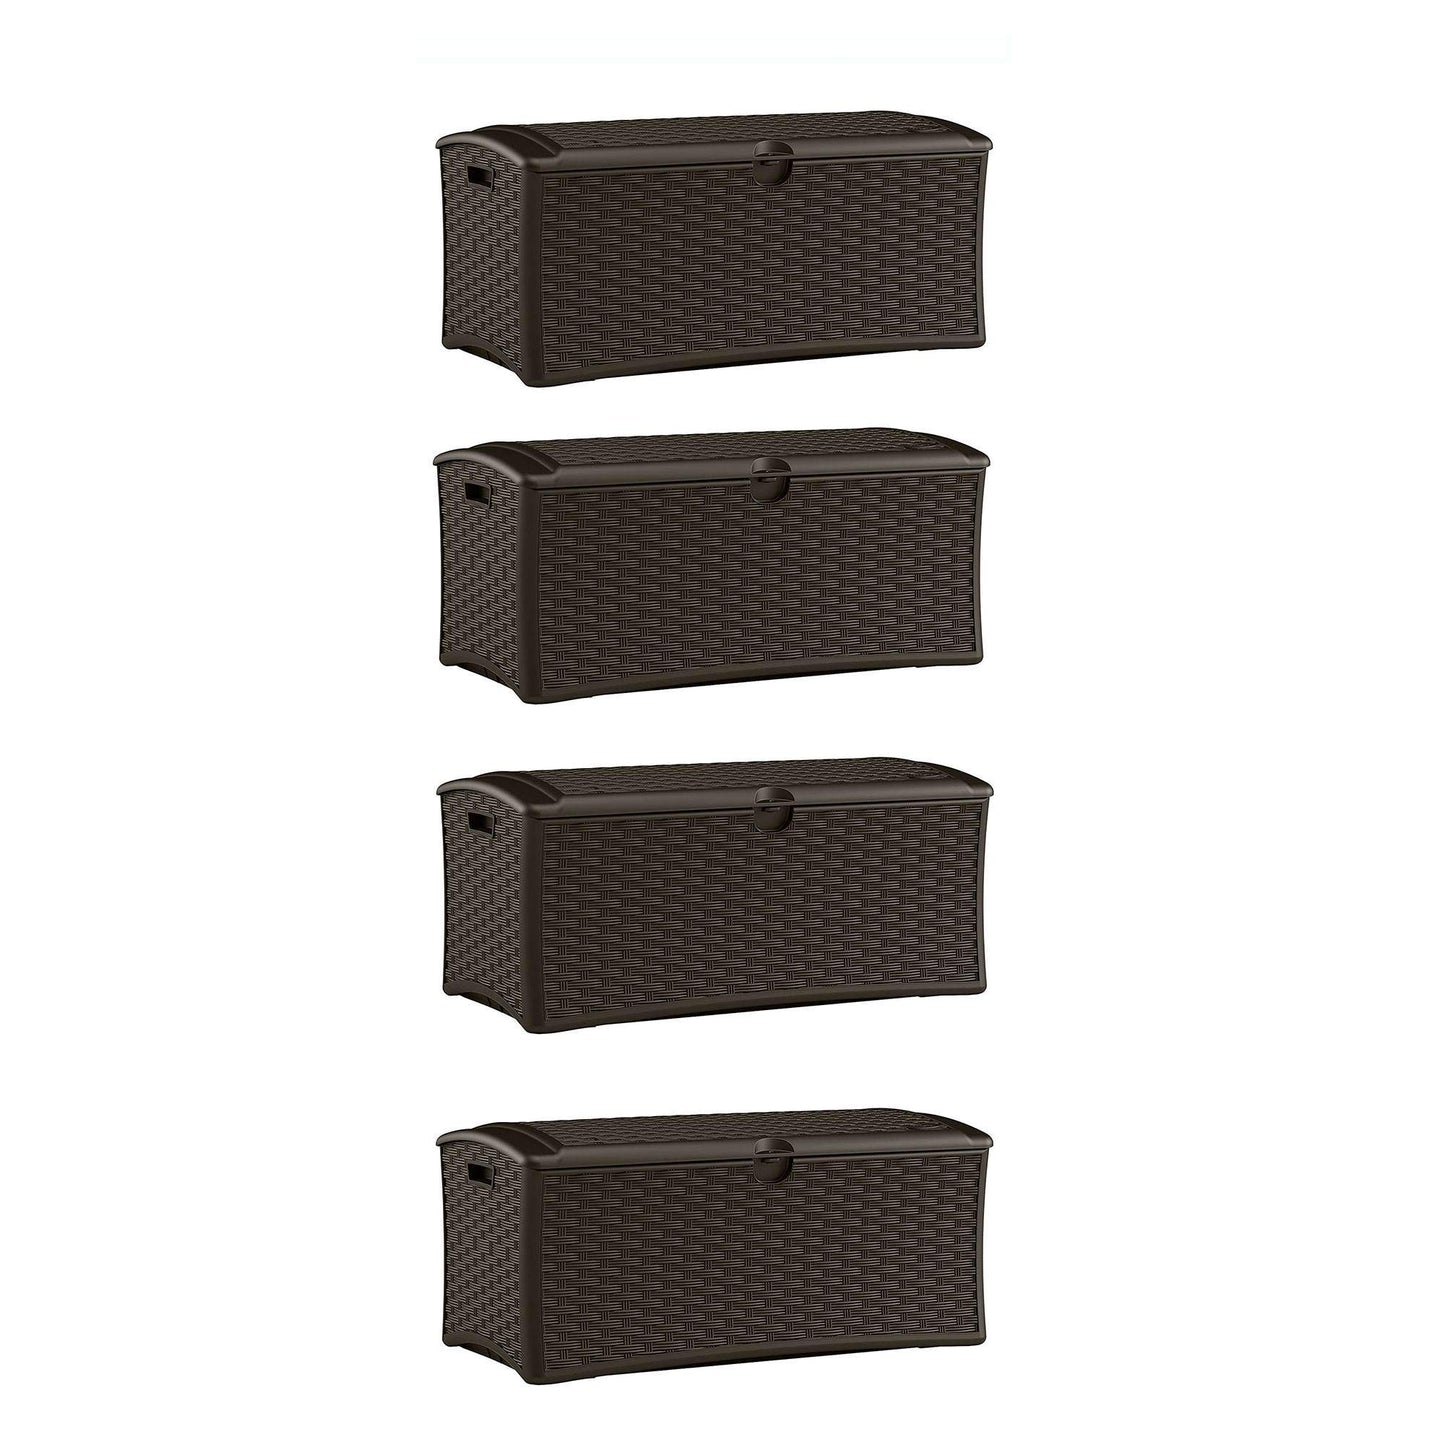 Suncast 72 Gallon Resin Wicker Outdoor Patio Storage Deck Box, Brown (4 Pack) 72 gallon - 4 Pack